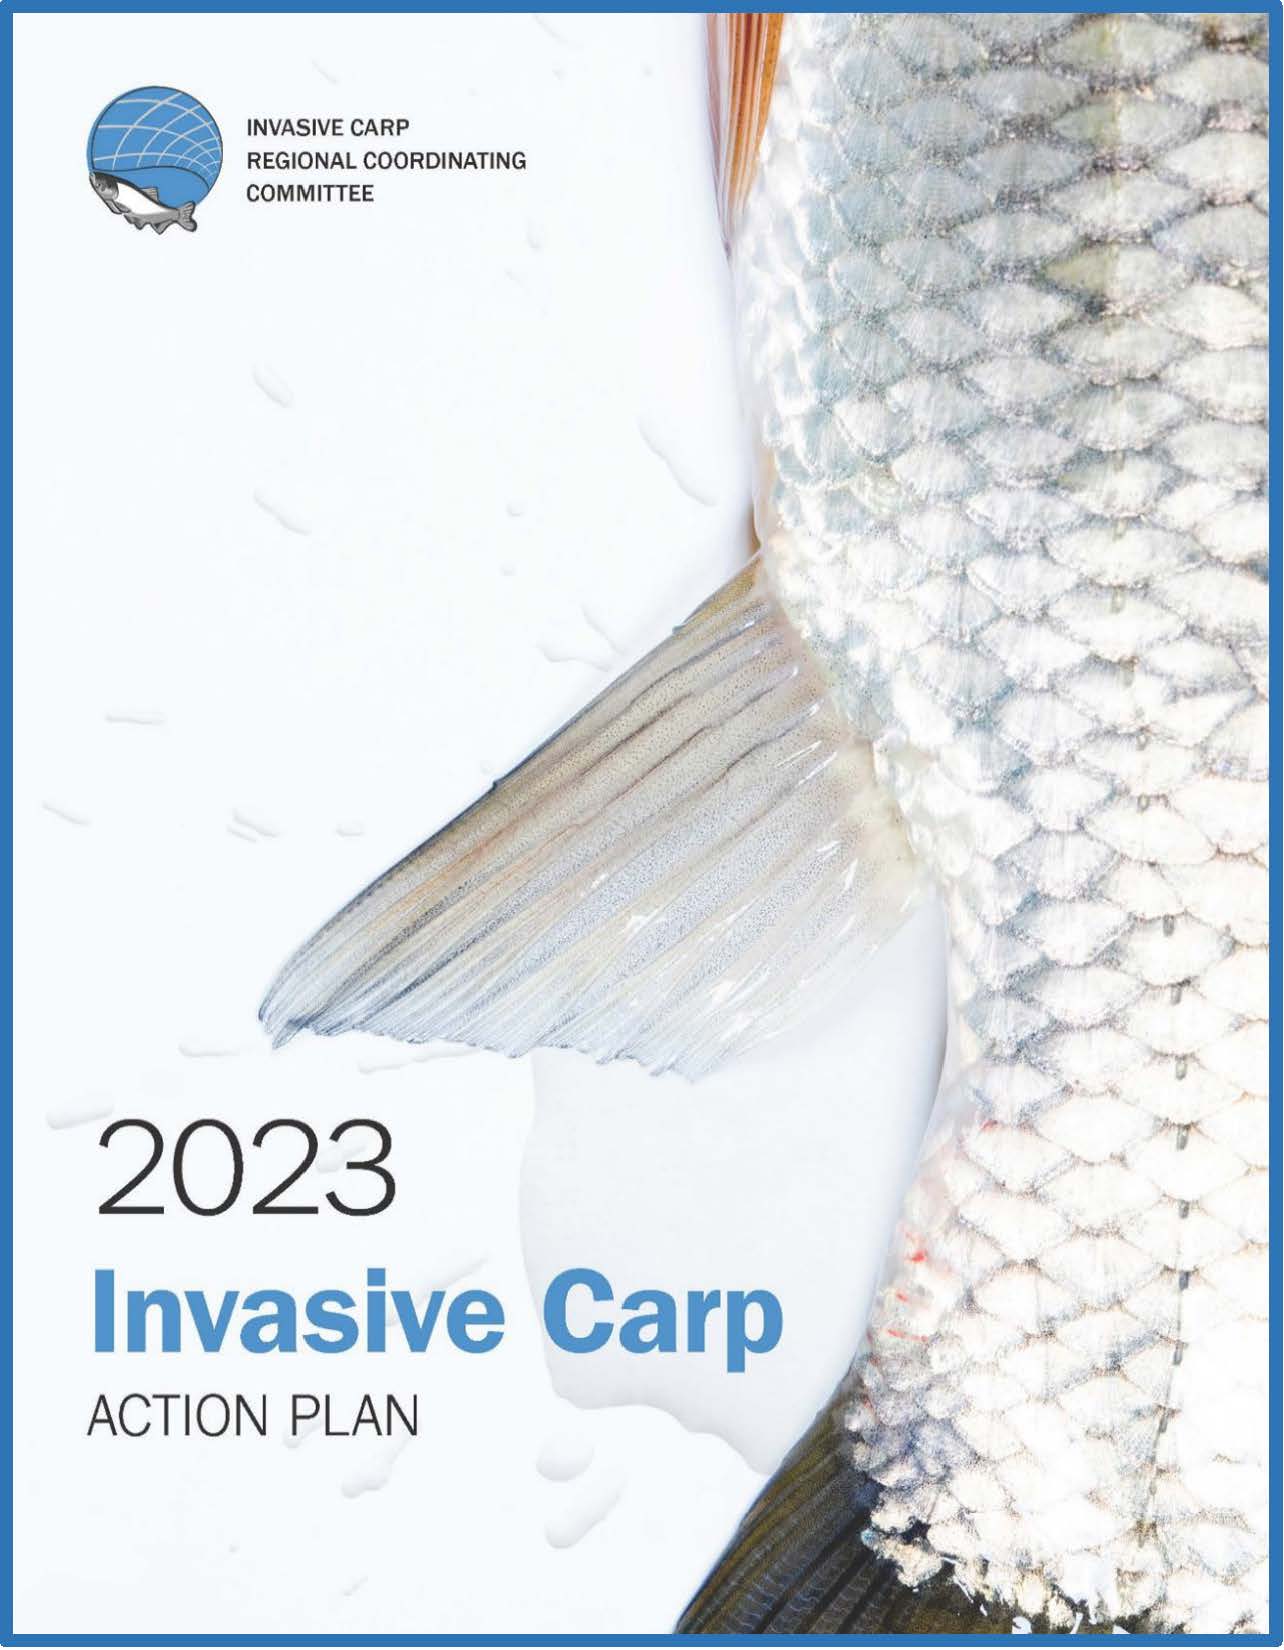 Cover of the 2023 Invasive Carp Action Plan.